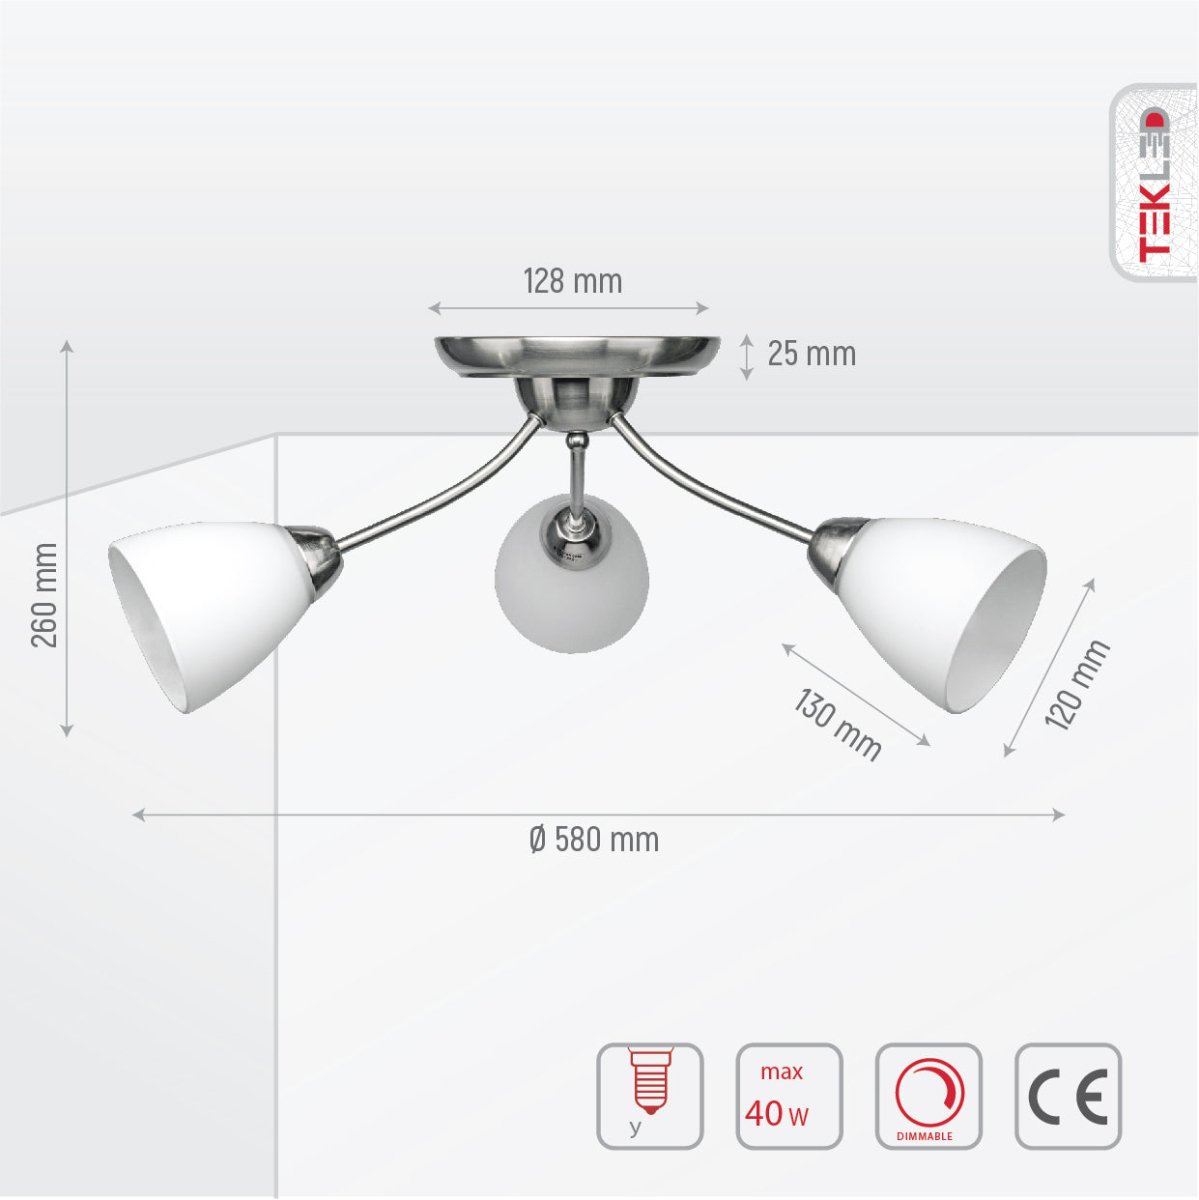 Product dimensions of white glass chrome semi-flush ceiling light with 3xE27 fitting